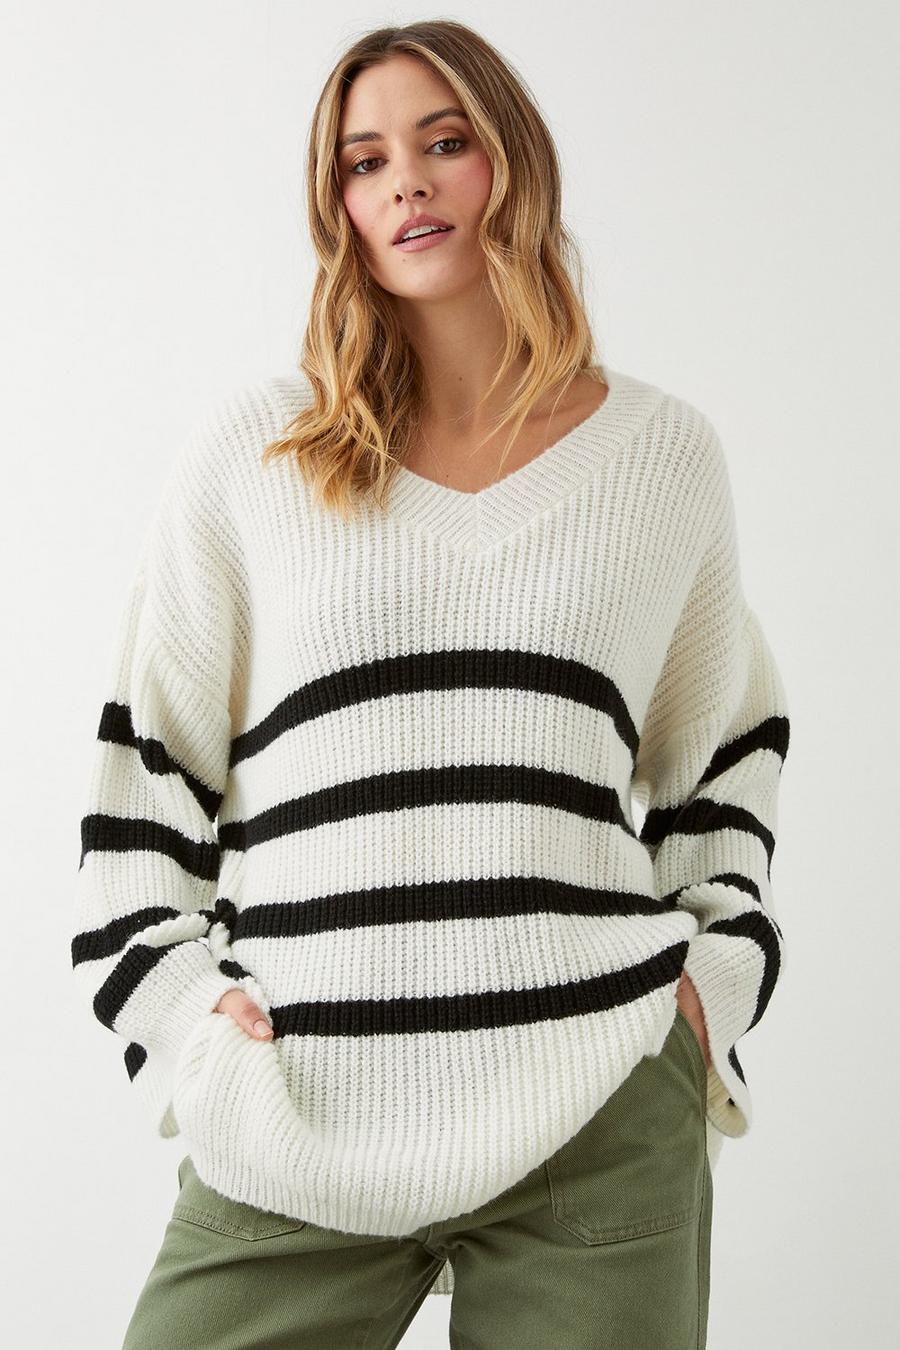 Women's Knitwear | Jumpers & Chunky Knit Cardigans | Dorothy Perkins UK